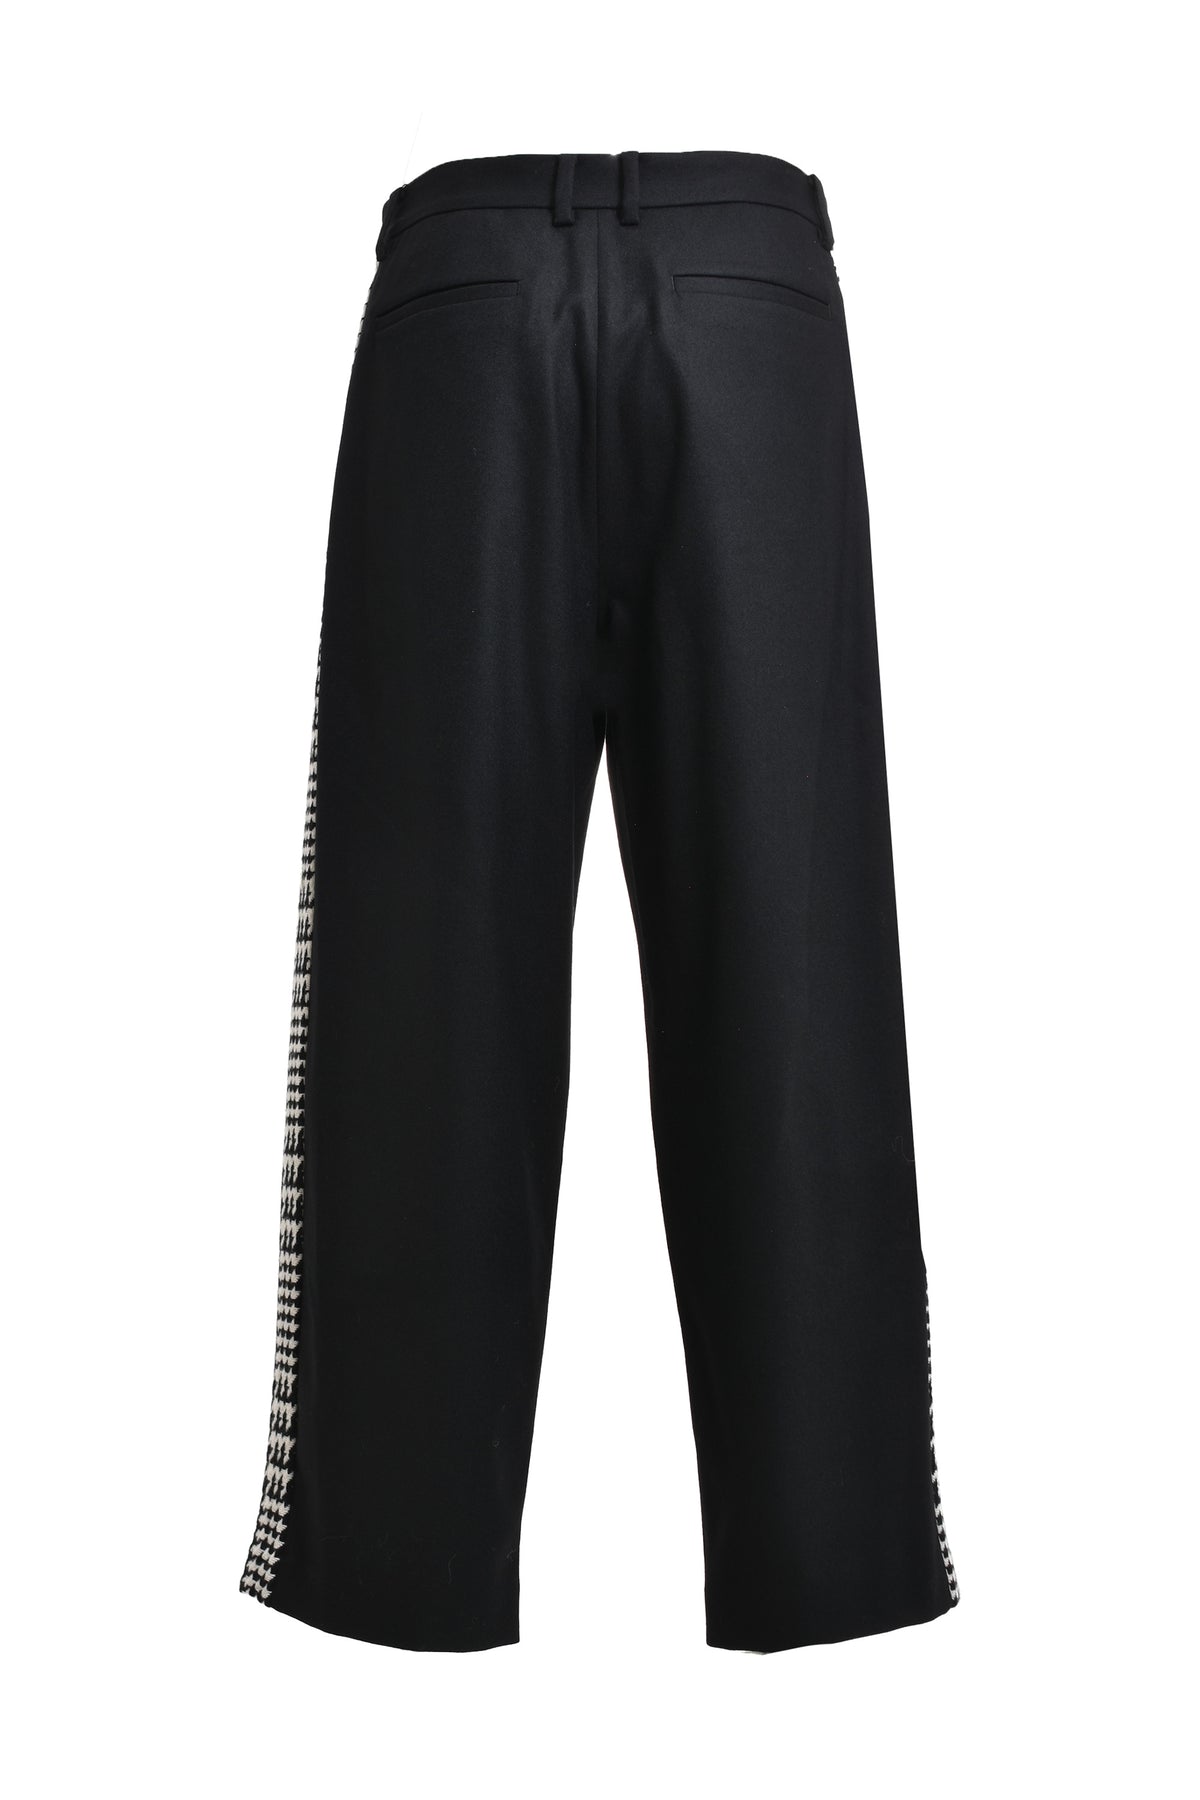 PHENOMENON HOUNDSTOOTH LINE TROUSERS / BLK